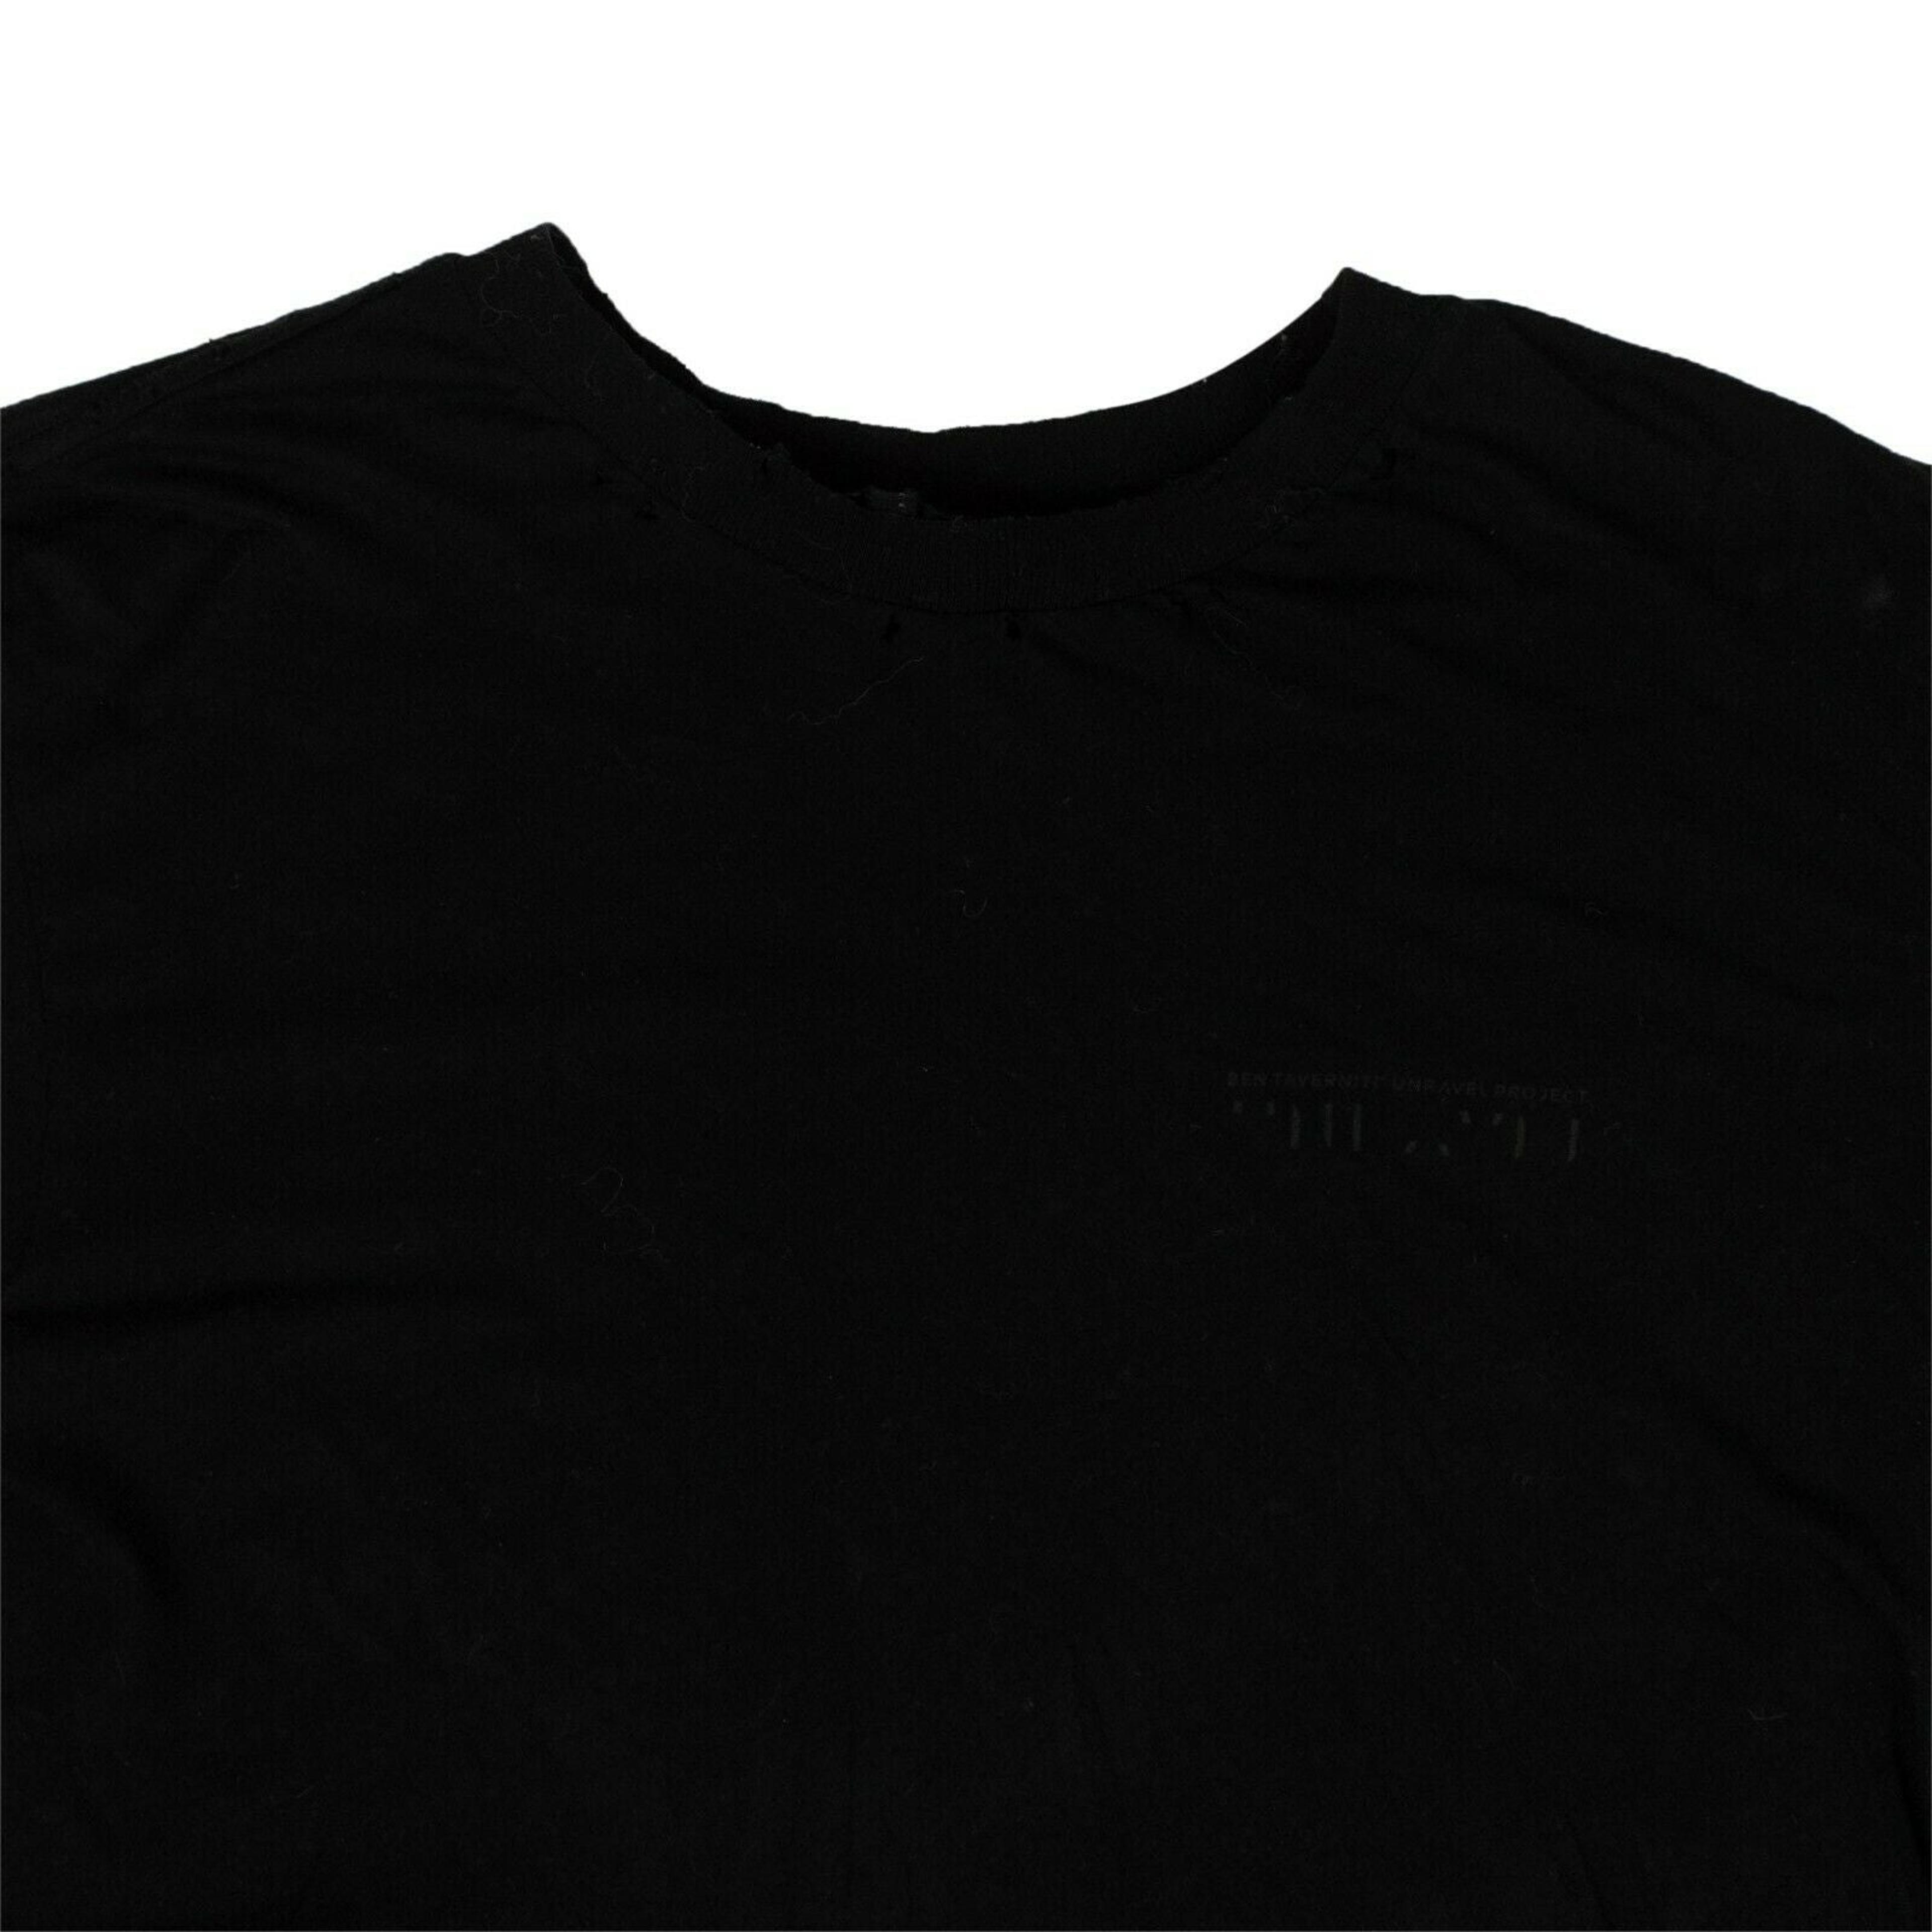 Alternate View 1 of Unravel Project Long Distressed T-Shirt - Black